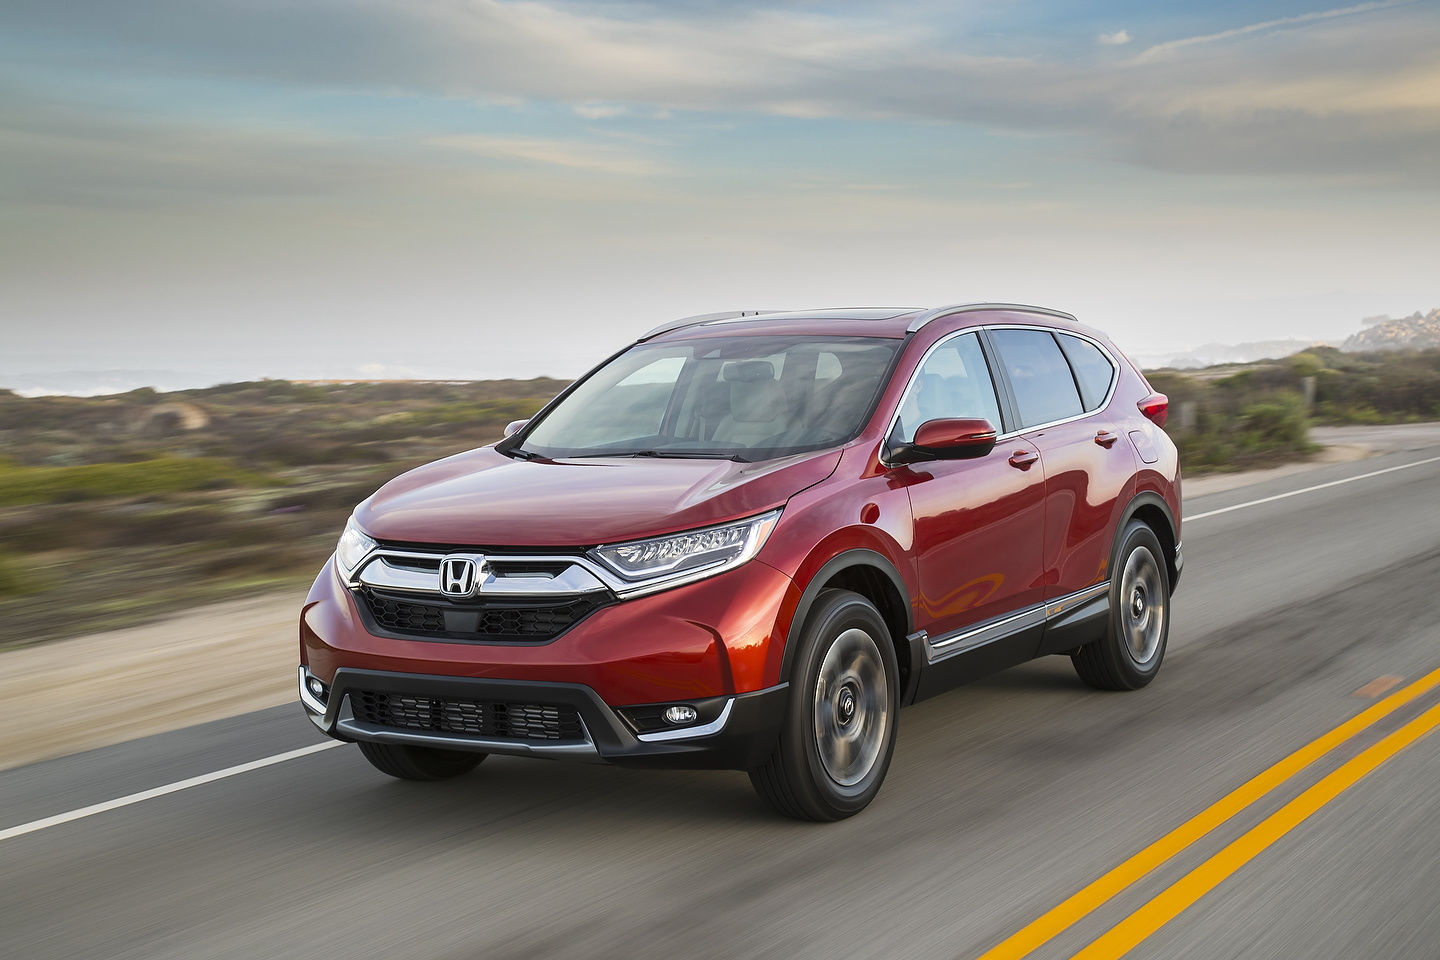 The 2019 Honda CR-V remains the benchmark in its segment